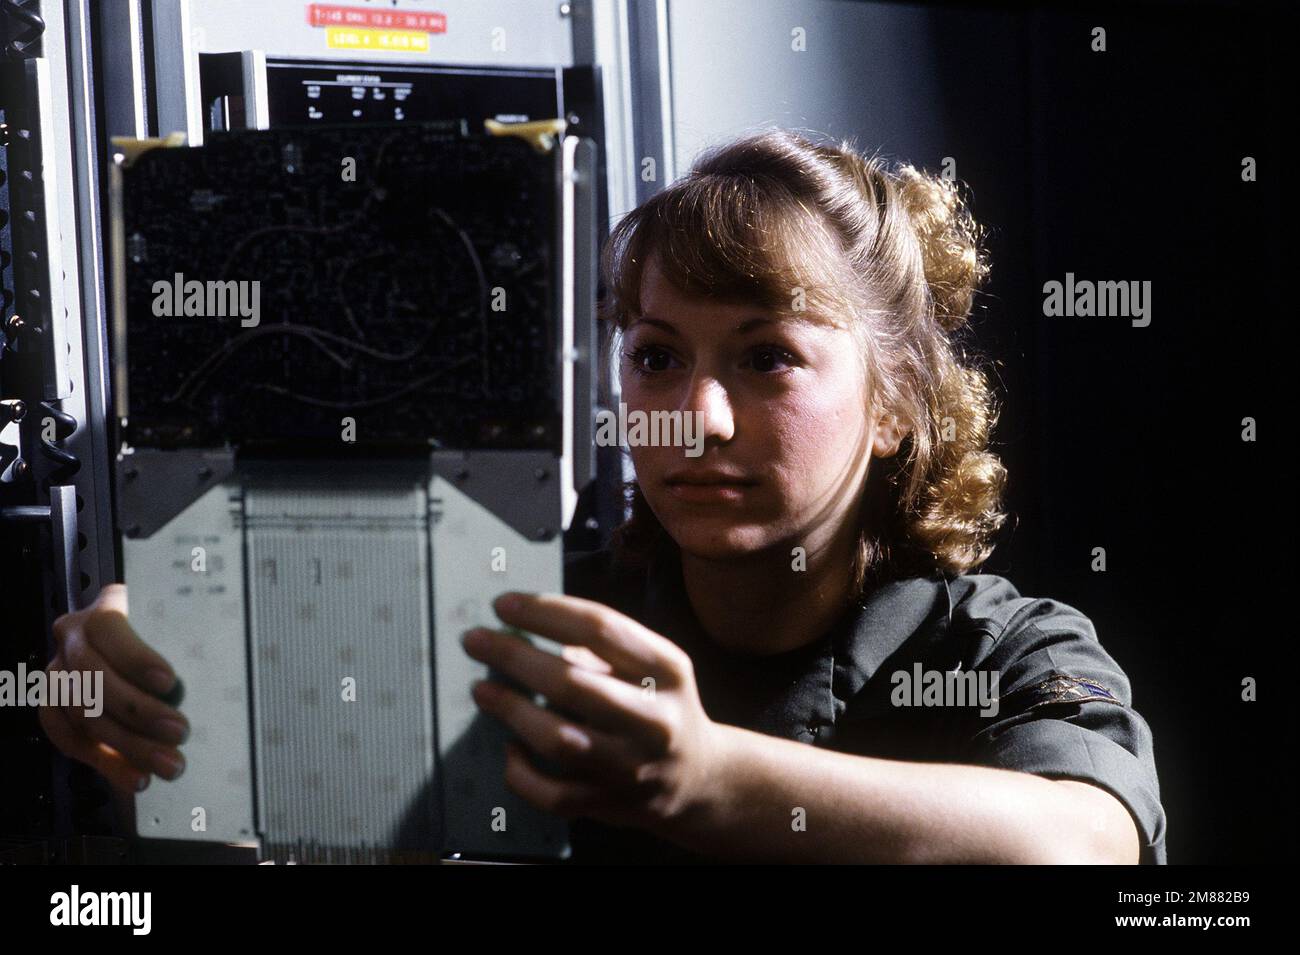 AIRMAN 1ST Class Julie Berry, a ground radio communications specialist of the 2006th Information Systems Group, inspects a channel A IF card used in radio transmitters. Base: Incirlik Air Base, Adana Country: Turkey (TUR) Stock Photo